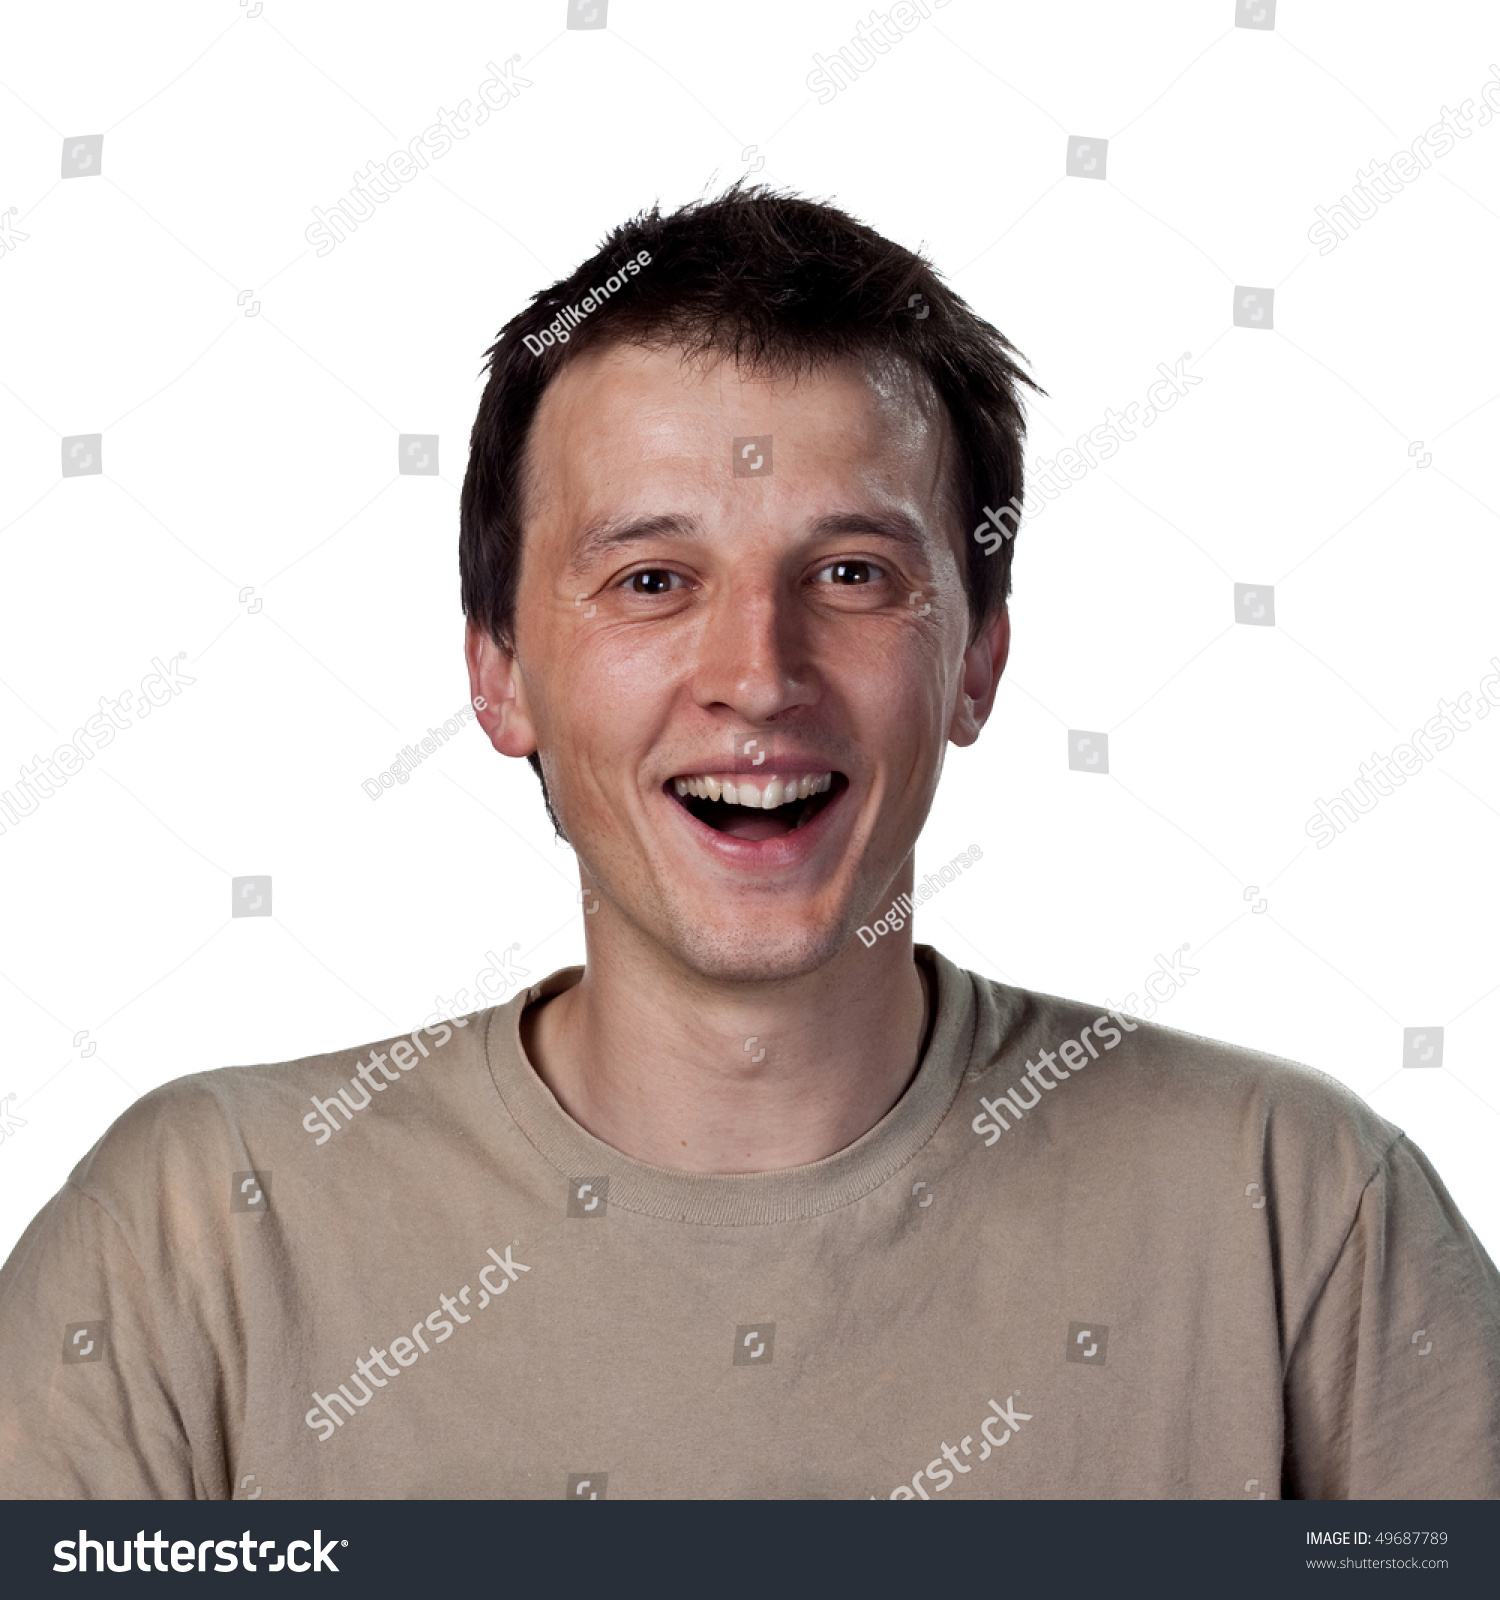 Smiling Young Man Stock Photo 49687789 - Shutterstock